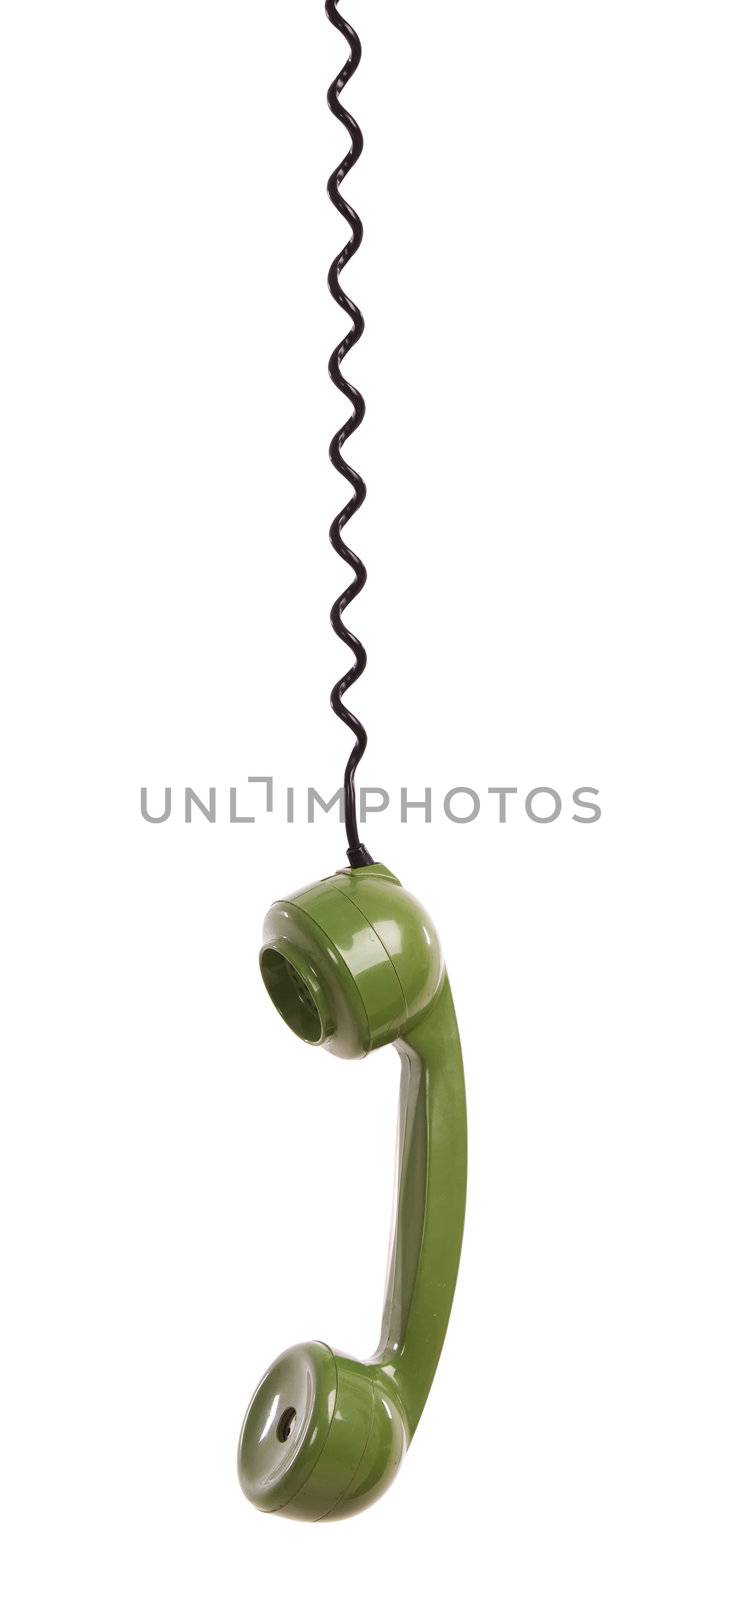 Green handpiece from a vintage telephone, isolated on white